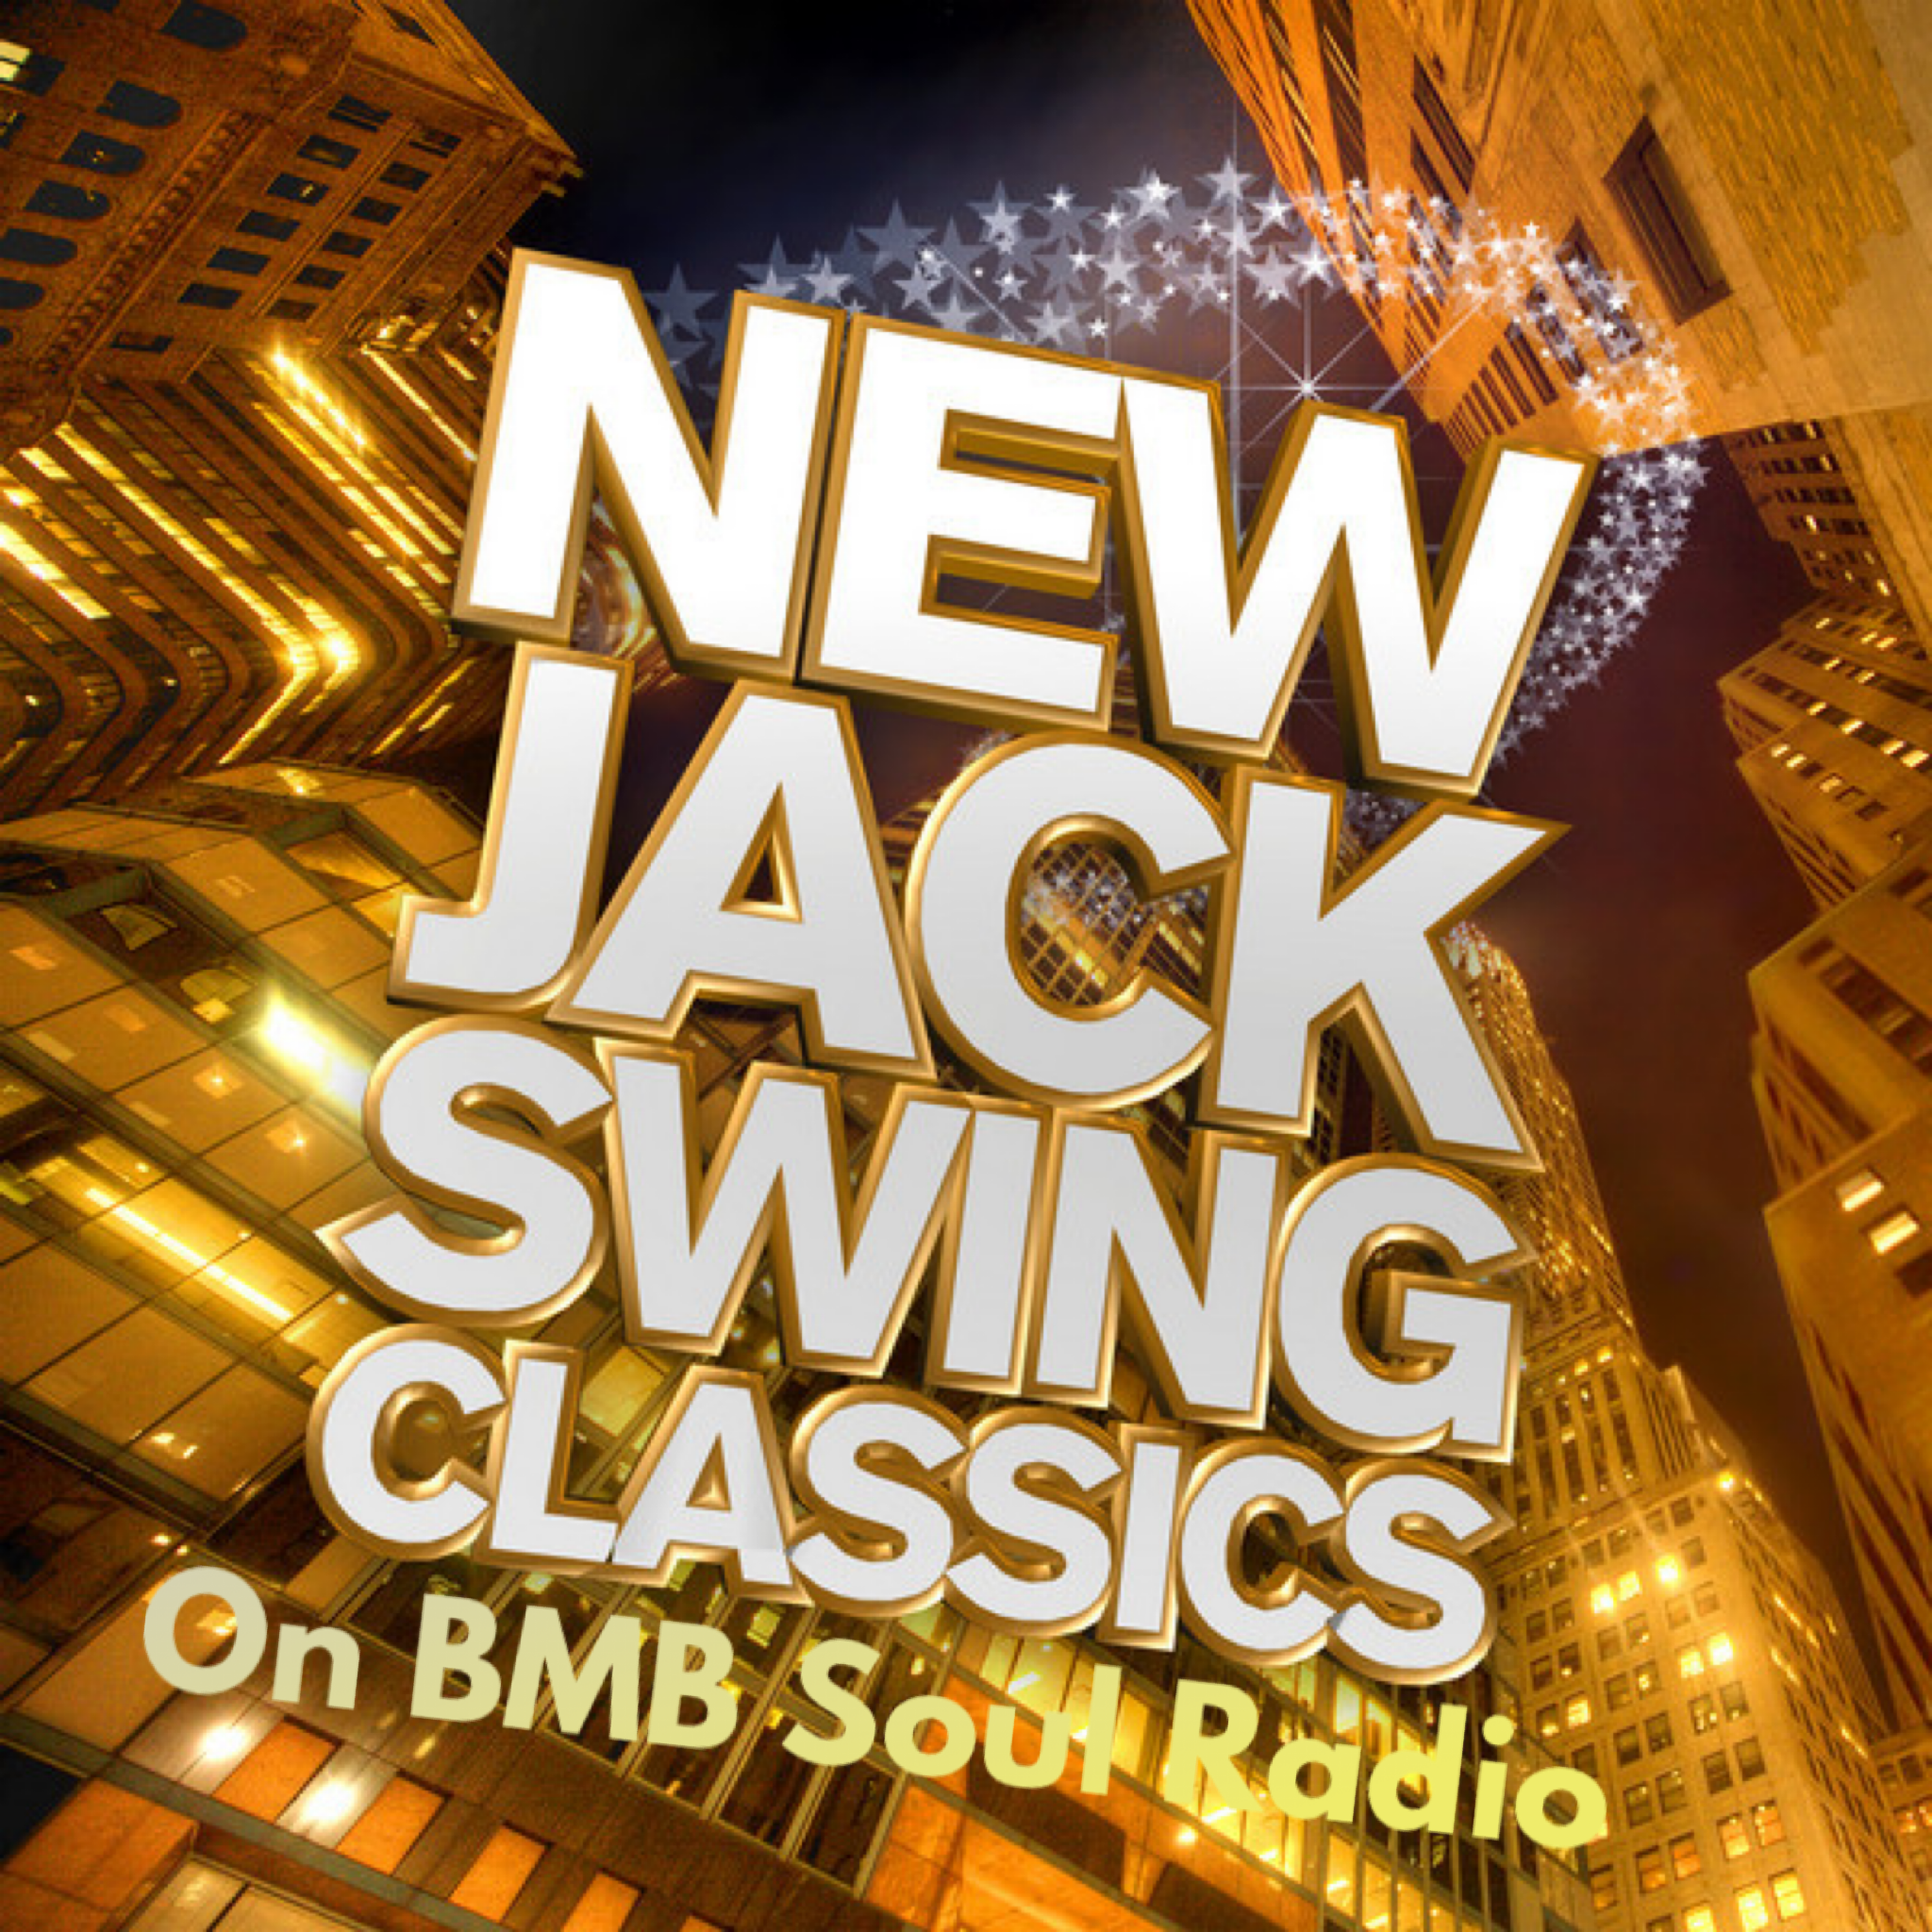 Art for 80s & 90s Throwback R&B New Jack Swing Love Mix byDj Shinski  by Tevin Campbell, Bobby Brown, SWV, TLC